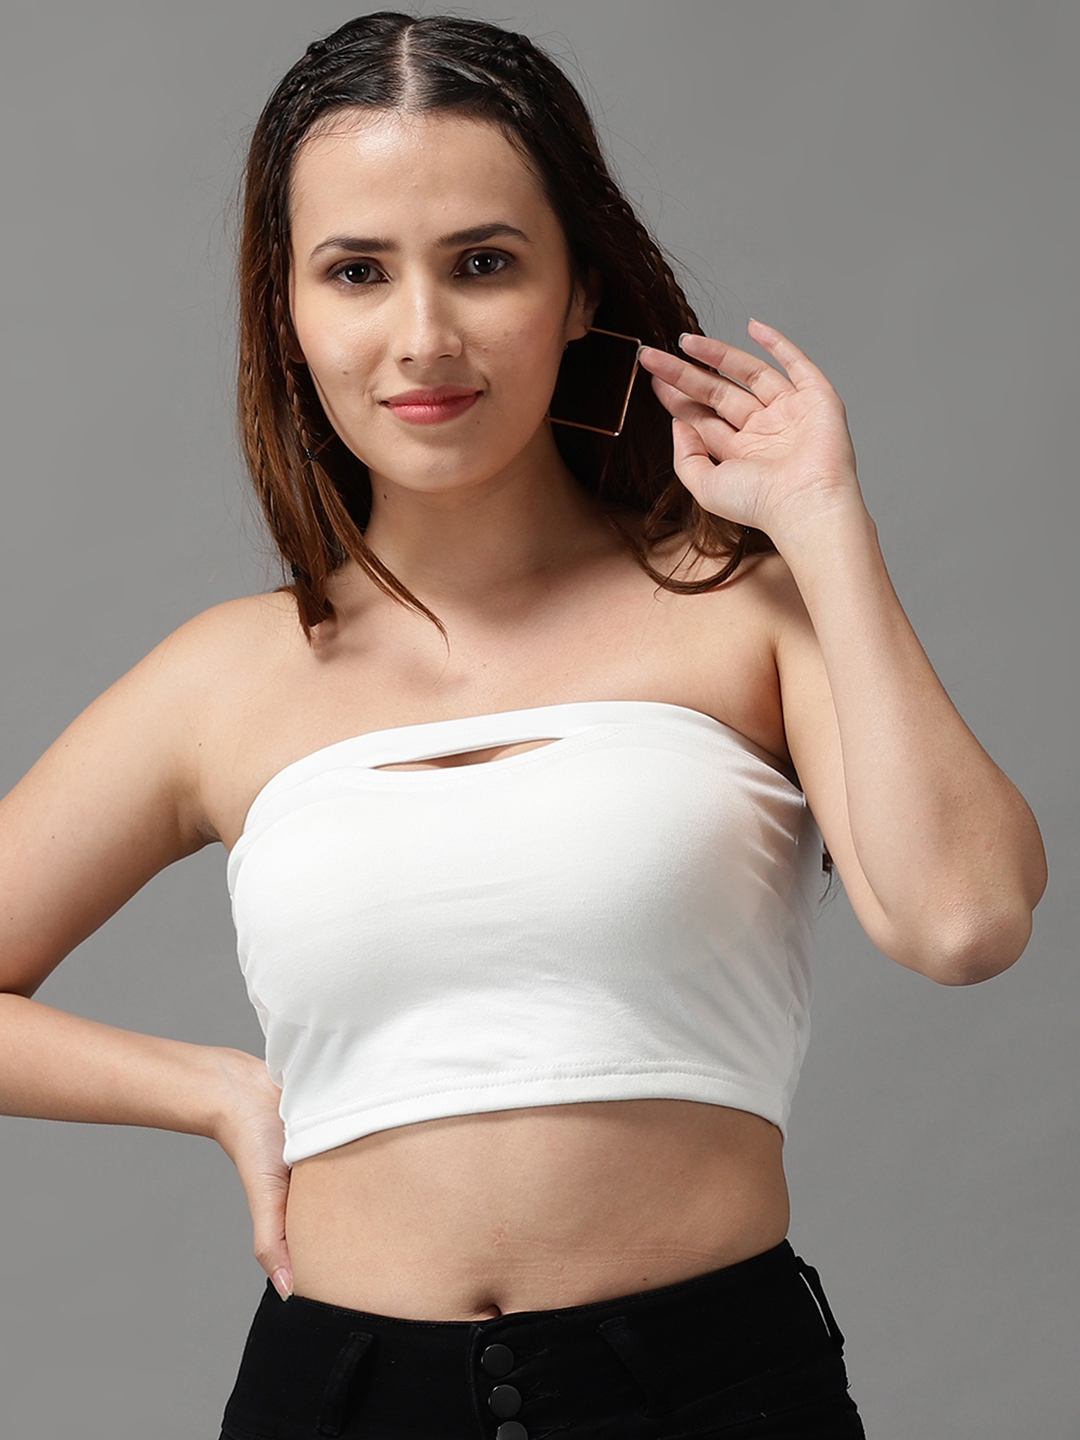 SHOWOFF Women's Strapless White Tube Crop Top